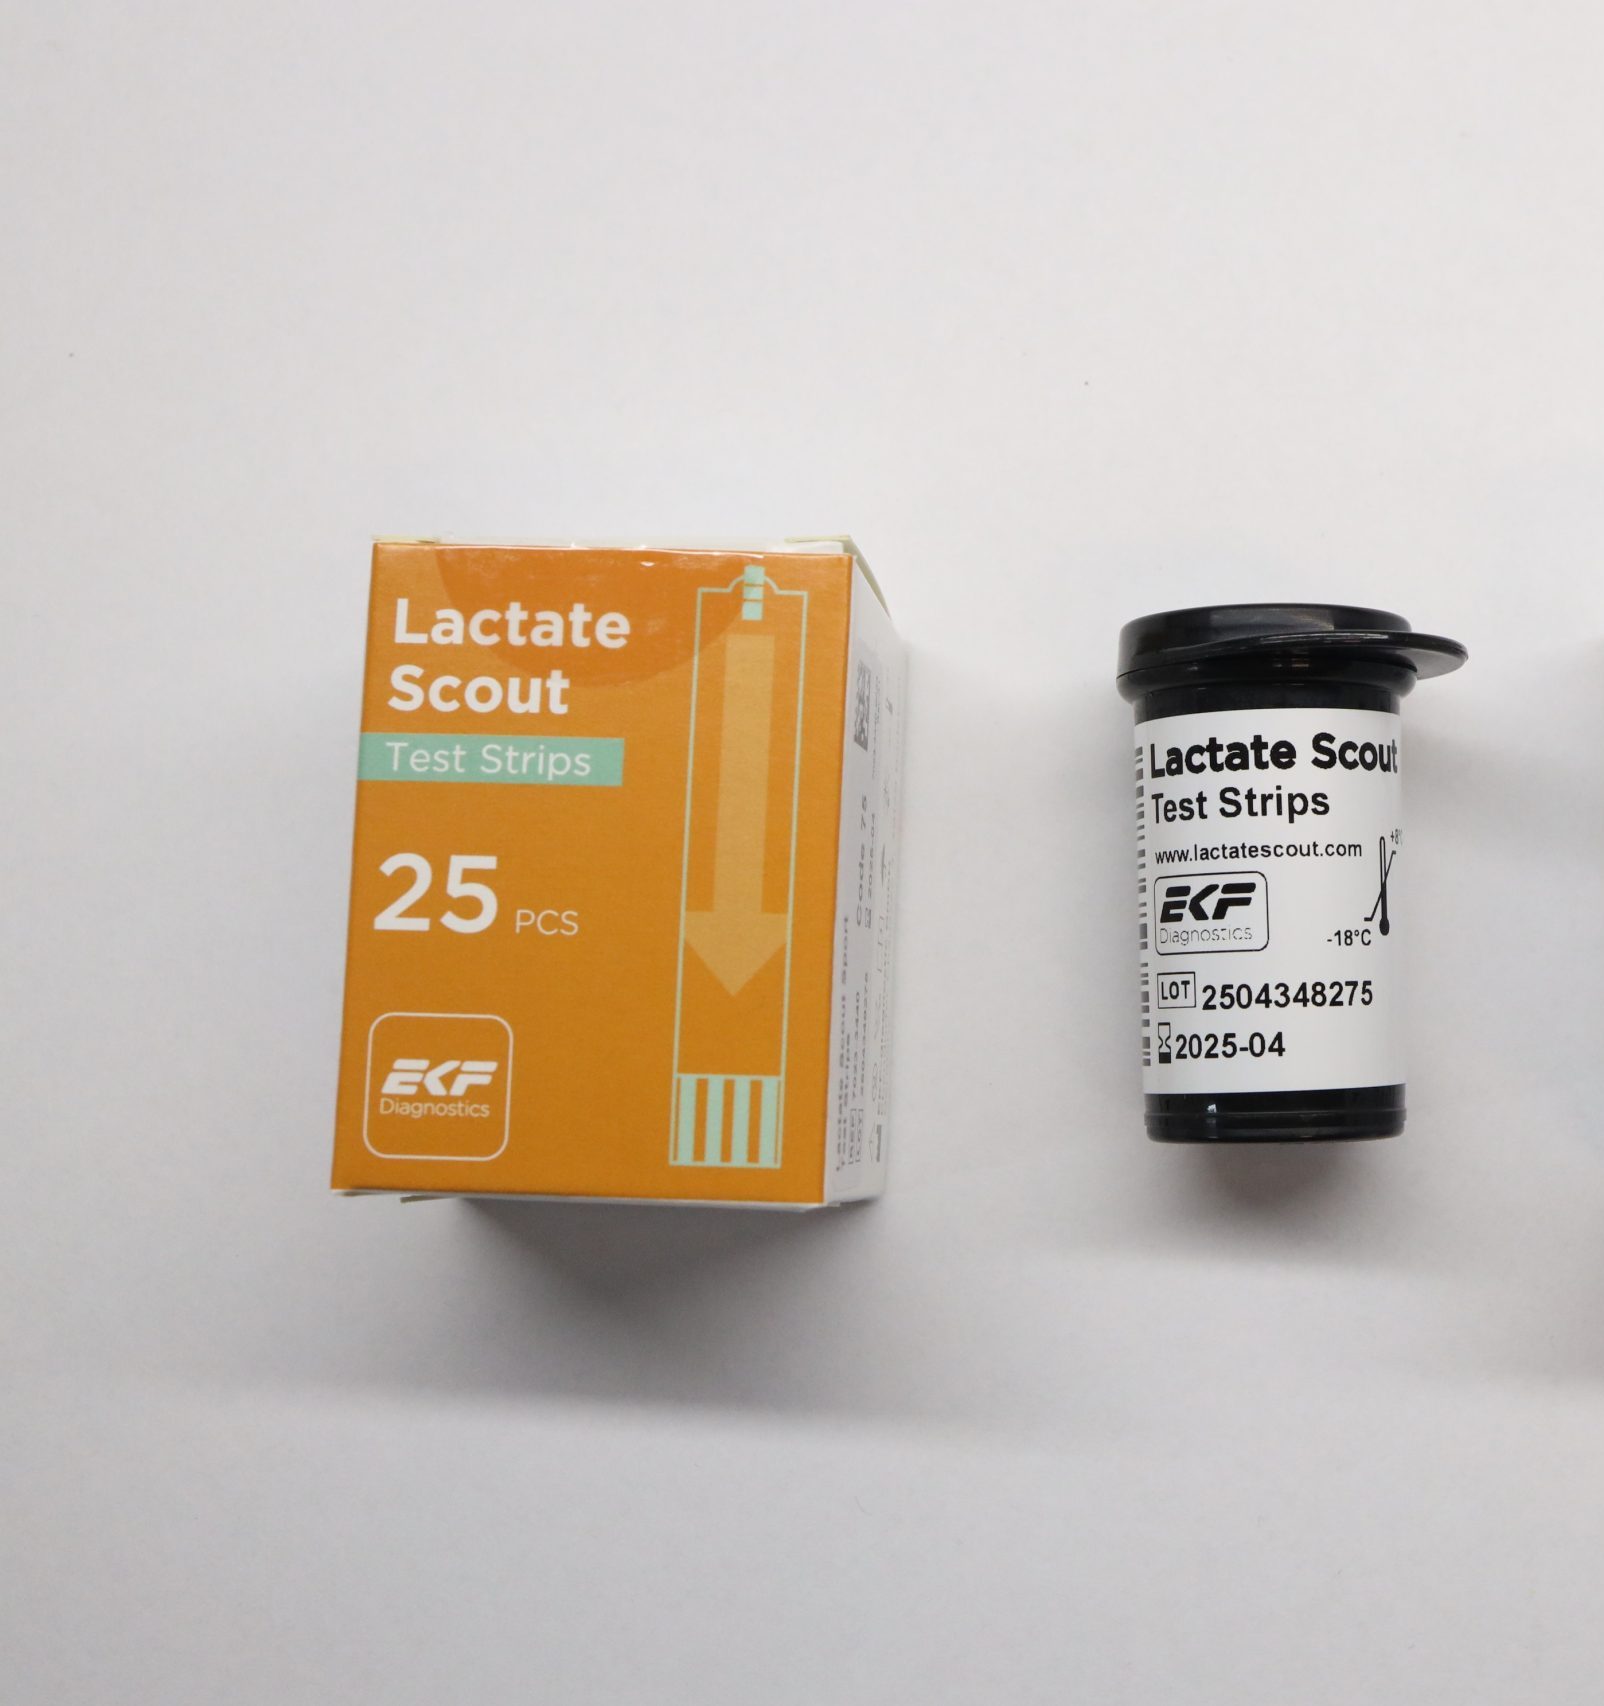 Lactate scout Test Strips